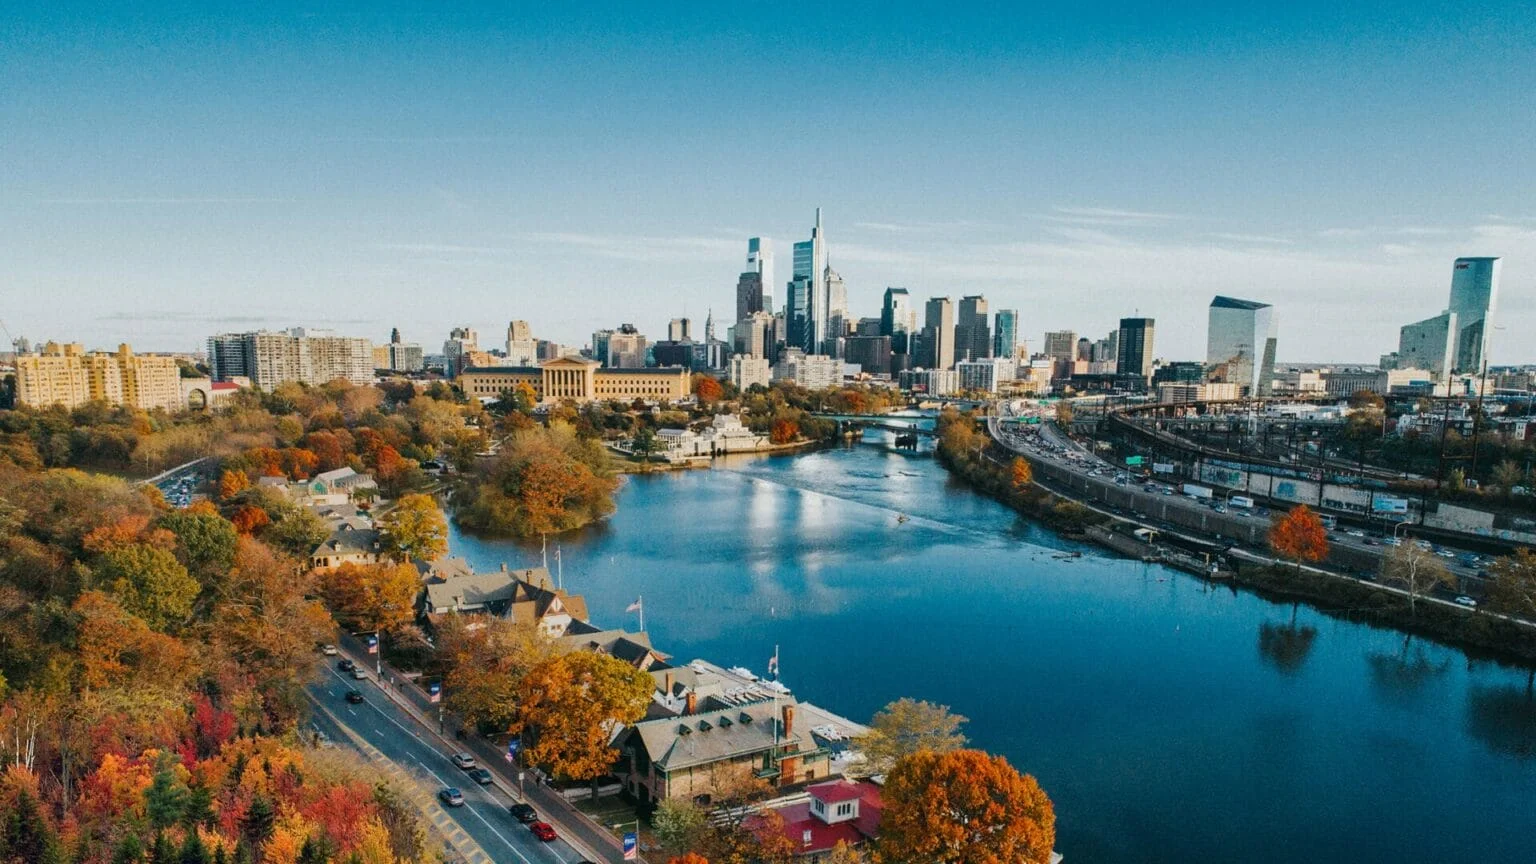 Aerial view of a river with trees showcasing fall colors, buildings, and a city skyline in the background under a clear blue sky.